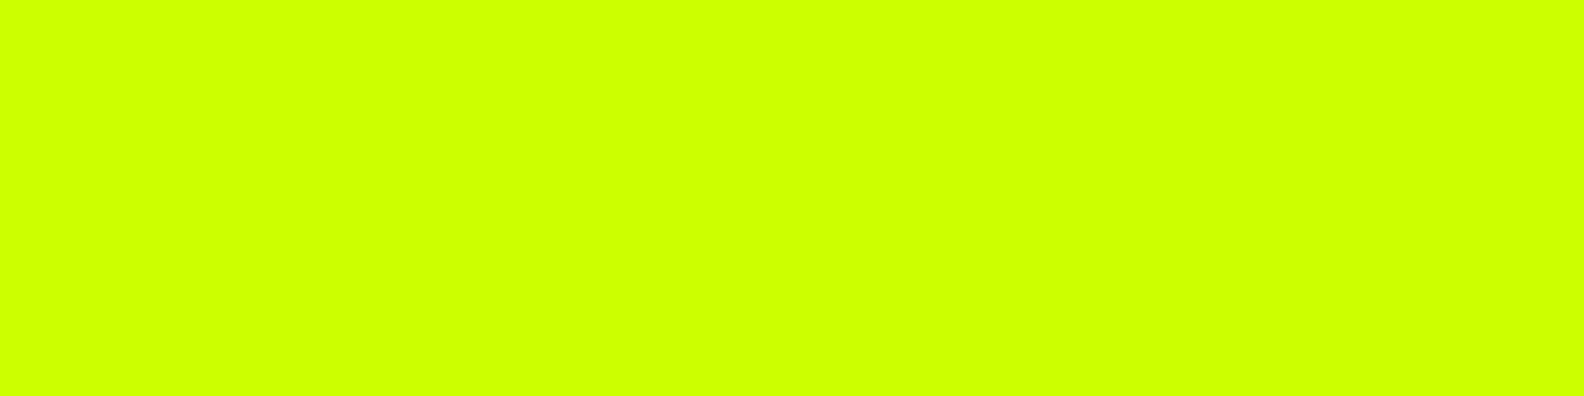 1584x396 Fluorescent Yellow Solid Color Background